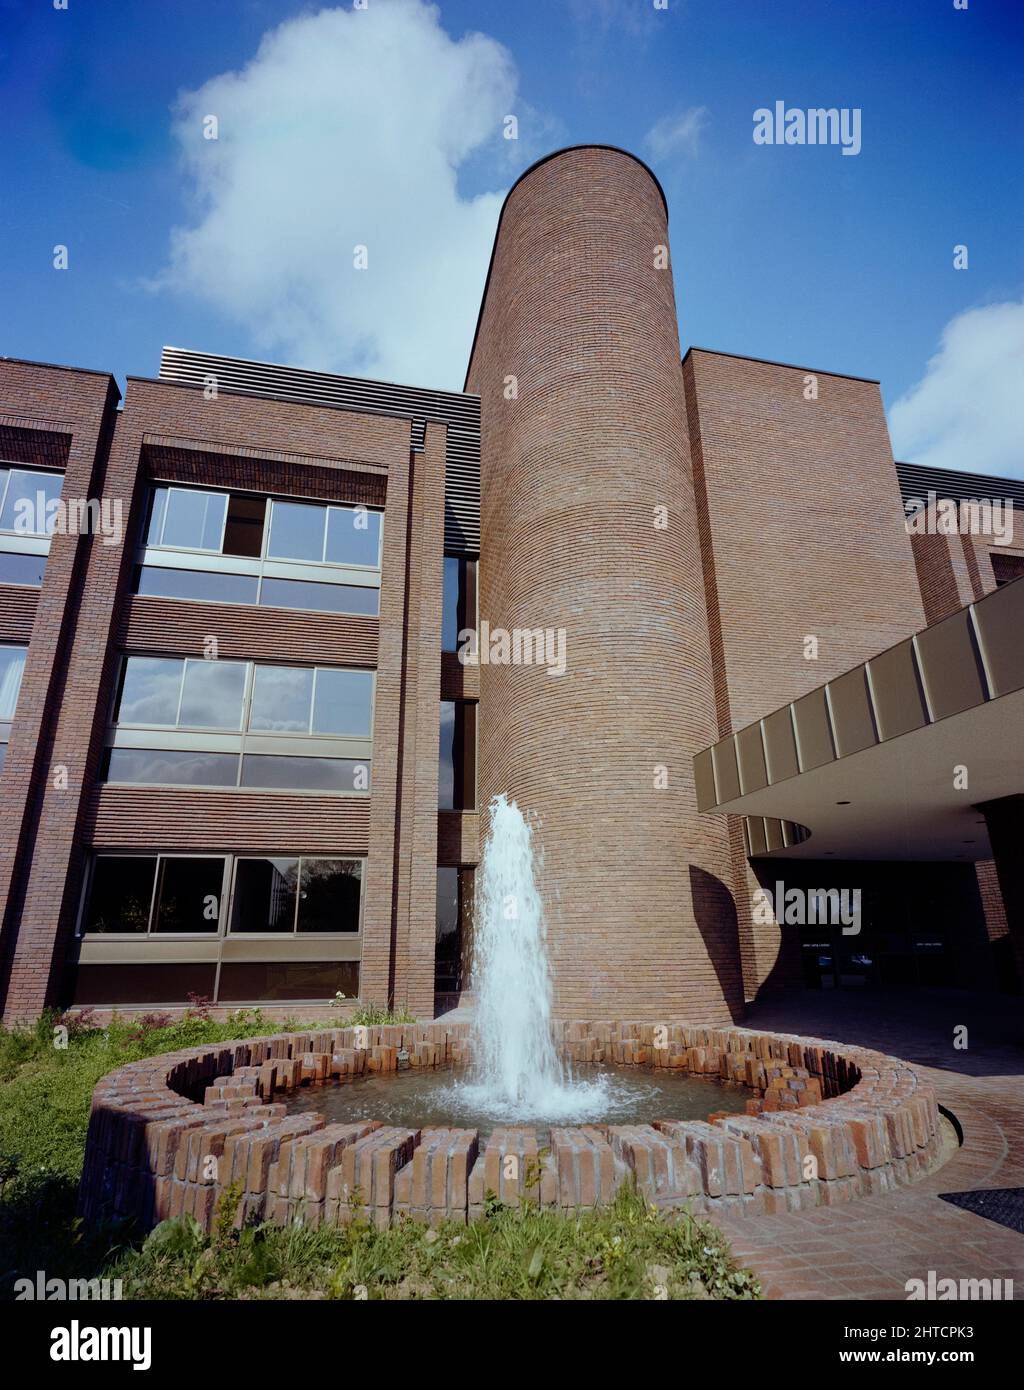 Sir John Laing Building, Page Street, Mill Hill, Barnet, London, 18/05/1981. The circular fountain and U-shaped stair tower by the front entrance to the Sir John Laing Building, Mill Hill. The Sir John Laing Building, named in honour of the company's president who died in January 1978 at the age of 98, was built between 1977 and 1980 having been planned since 1974.  The building completed a phase of development at Laing's Mill Hill headquarters complex, an area that the firm had occupied since moving from Carlisle in 1922.  By 1988 however a major restructuring of the company and meant a whole Stock Photo